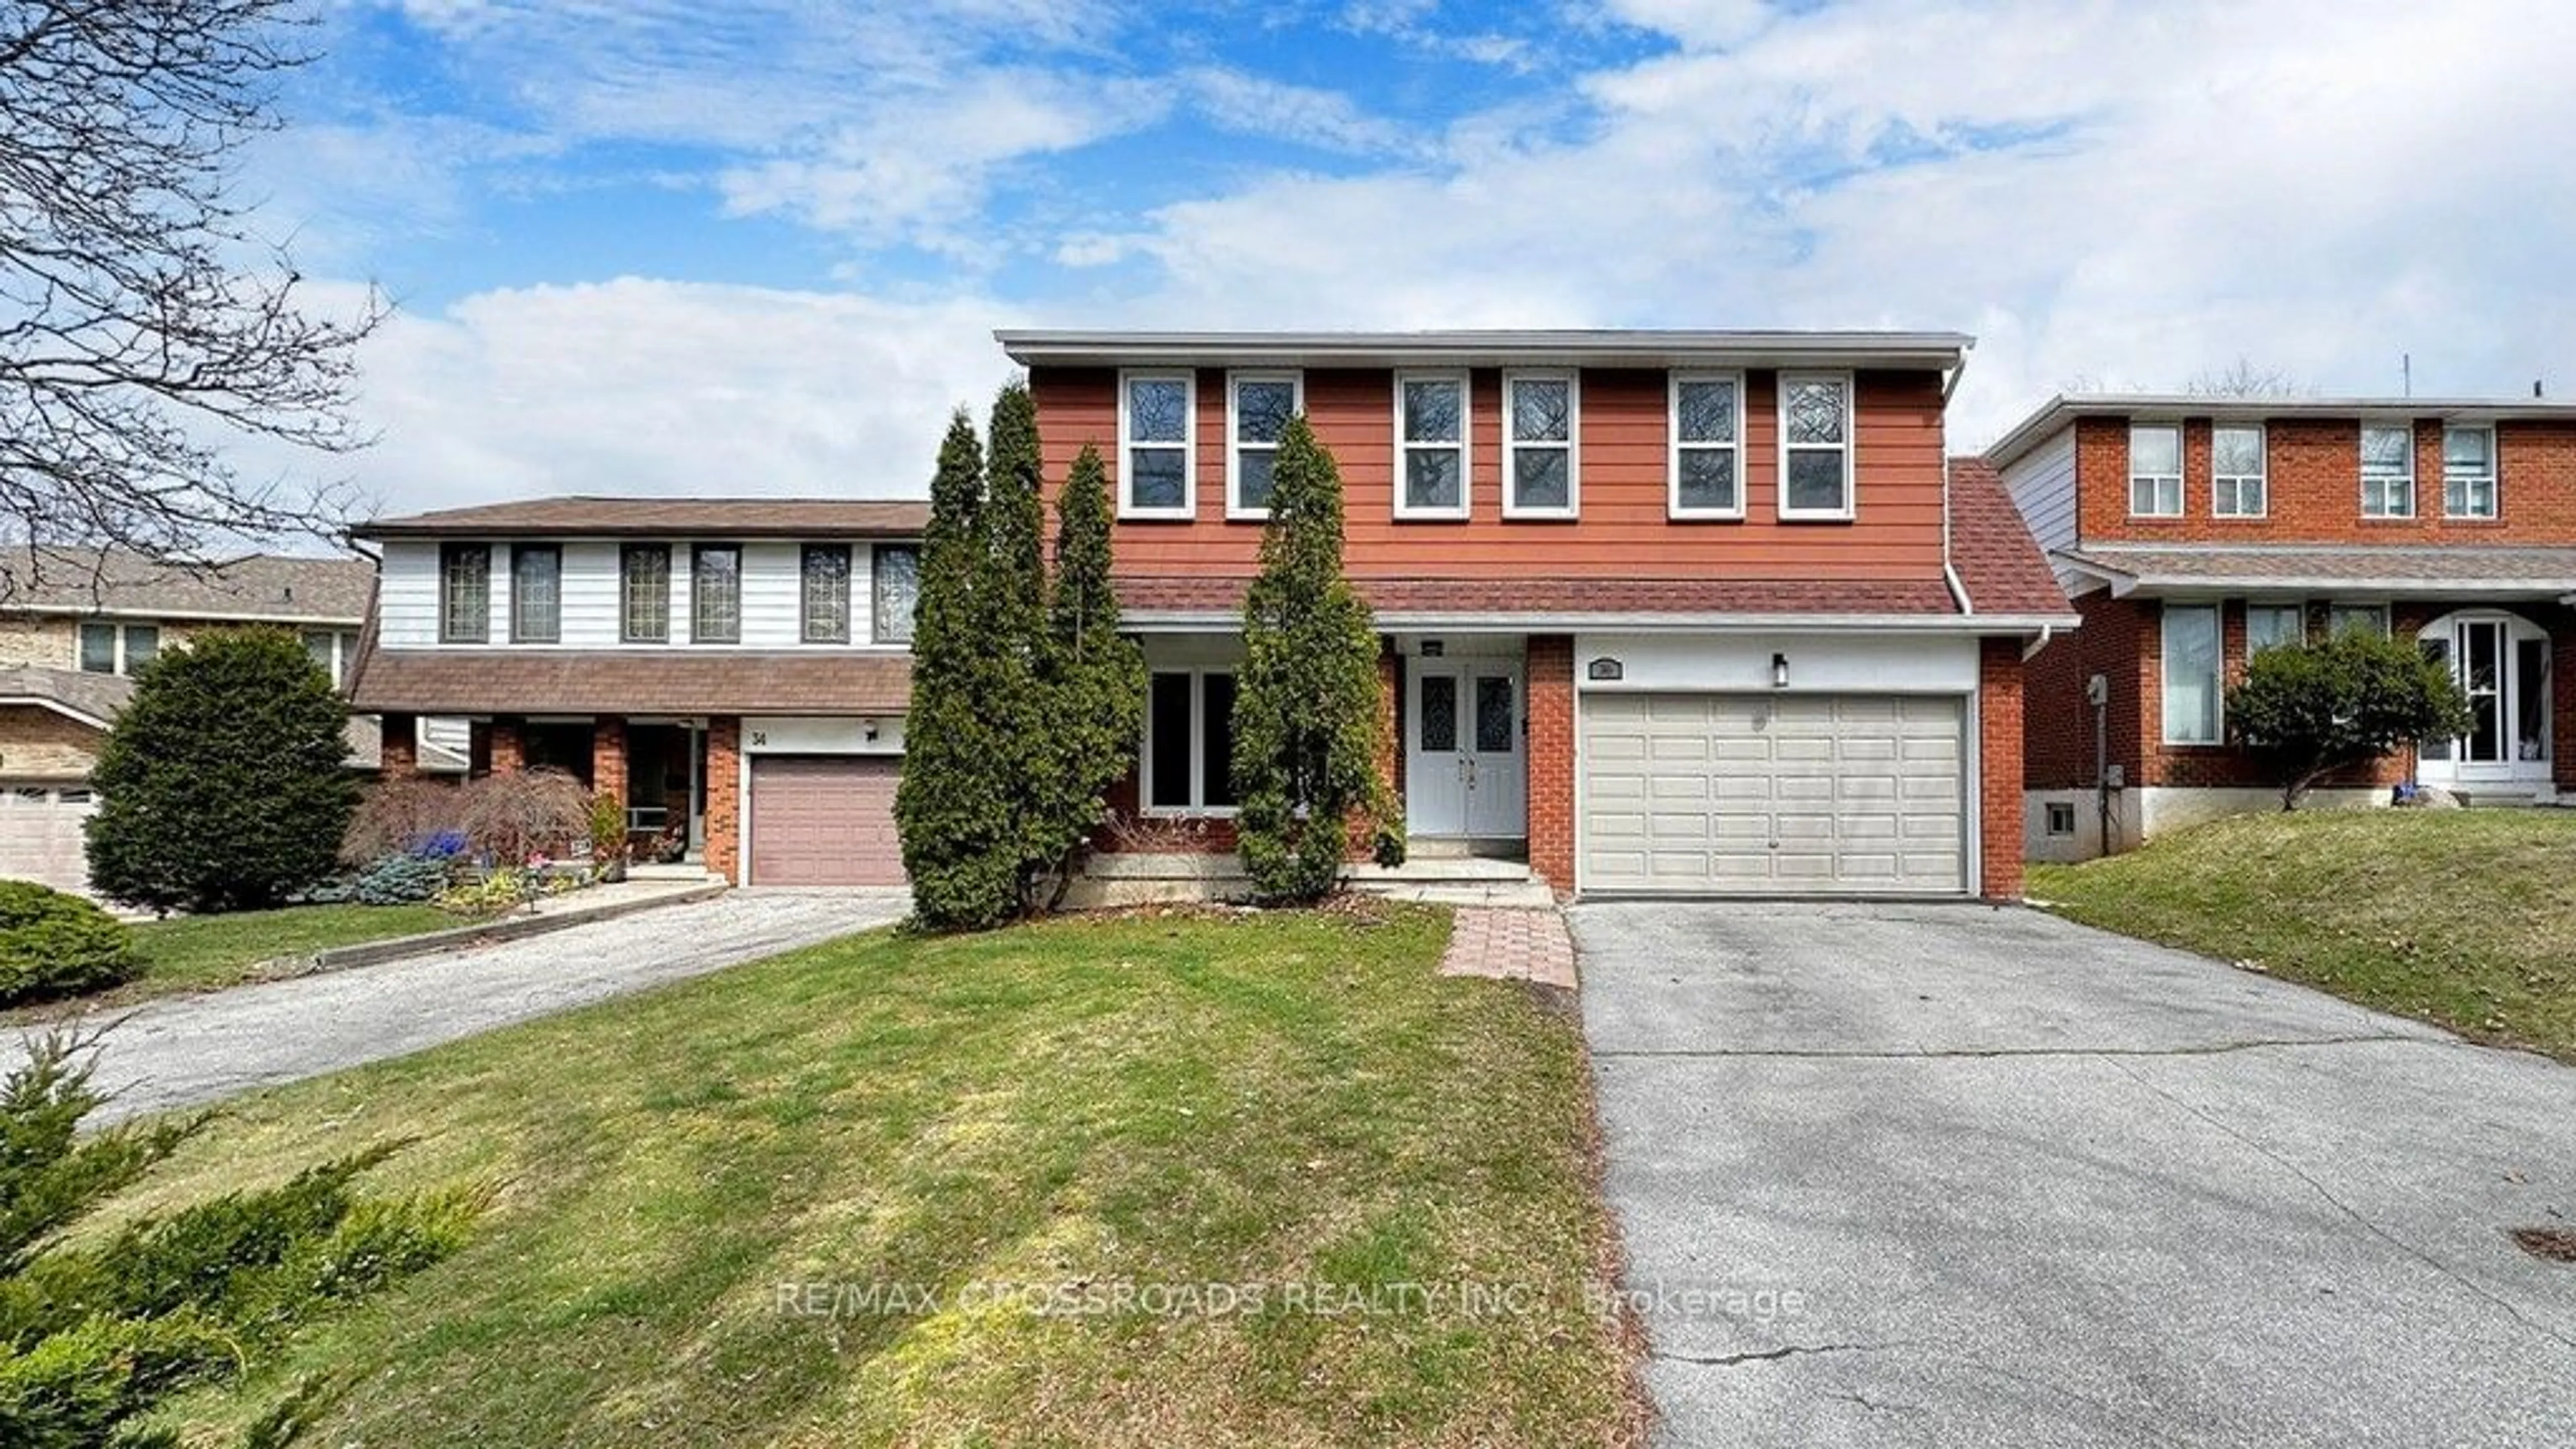 Home with brick exterior material for 36 Flowervale Rd, Markham Ontario L3T 4J4